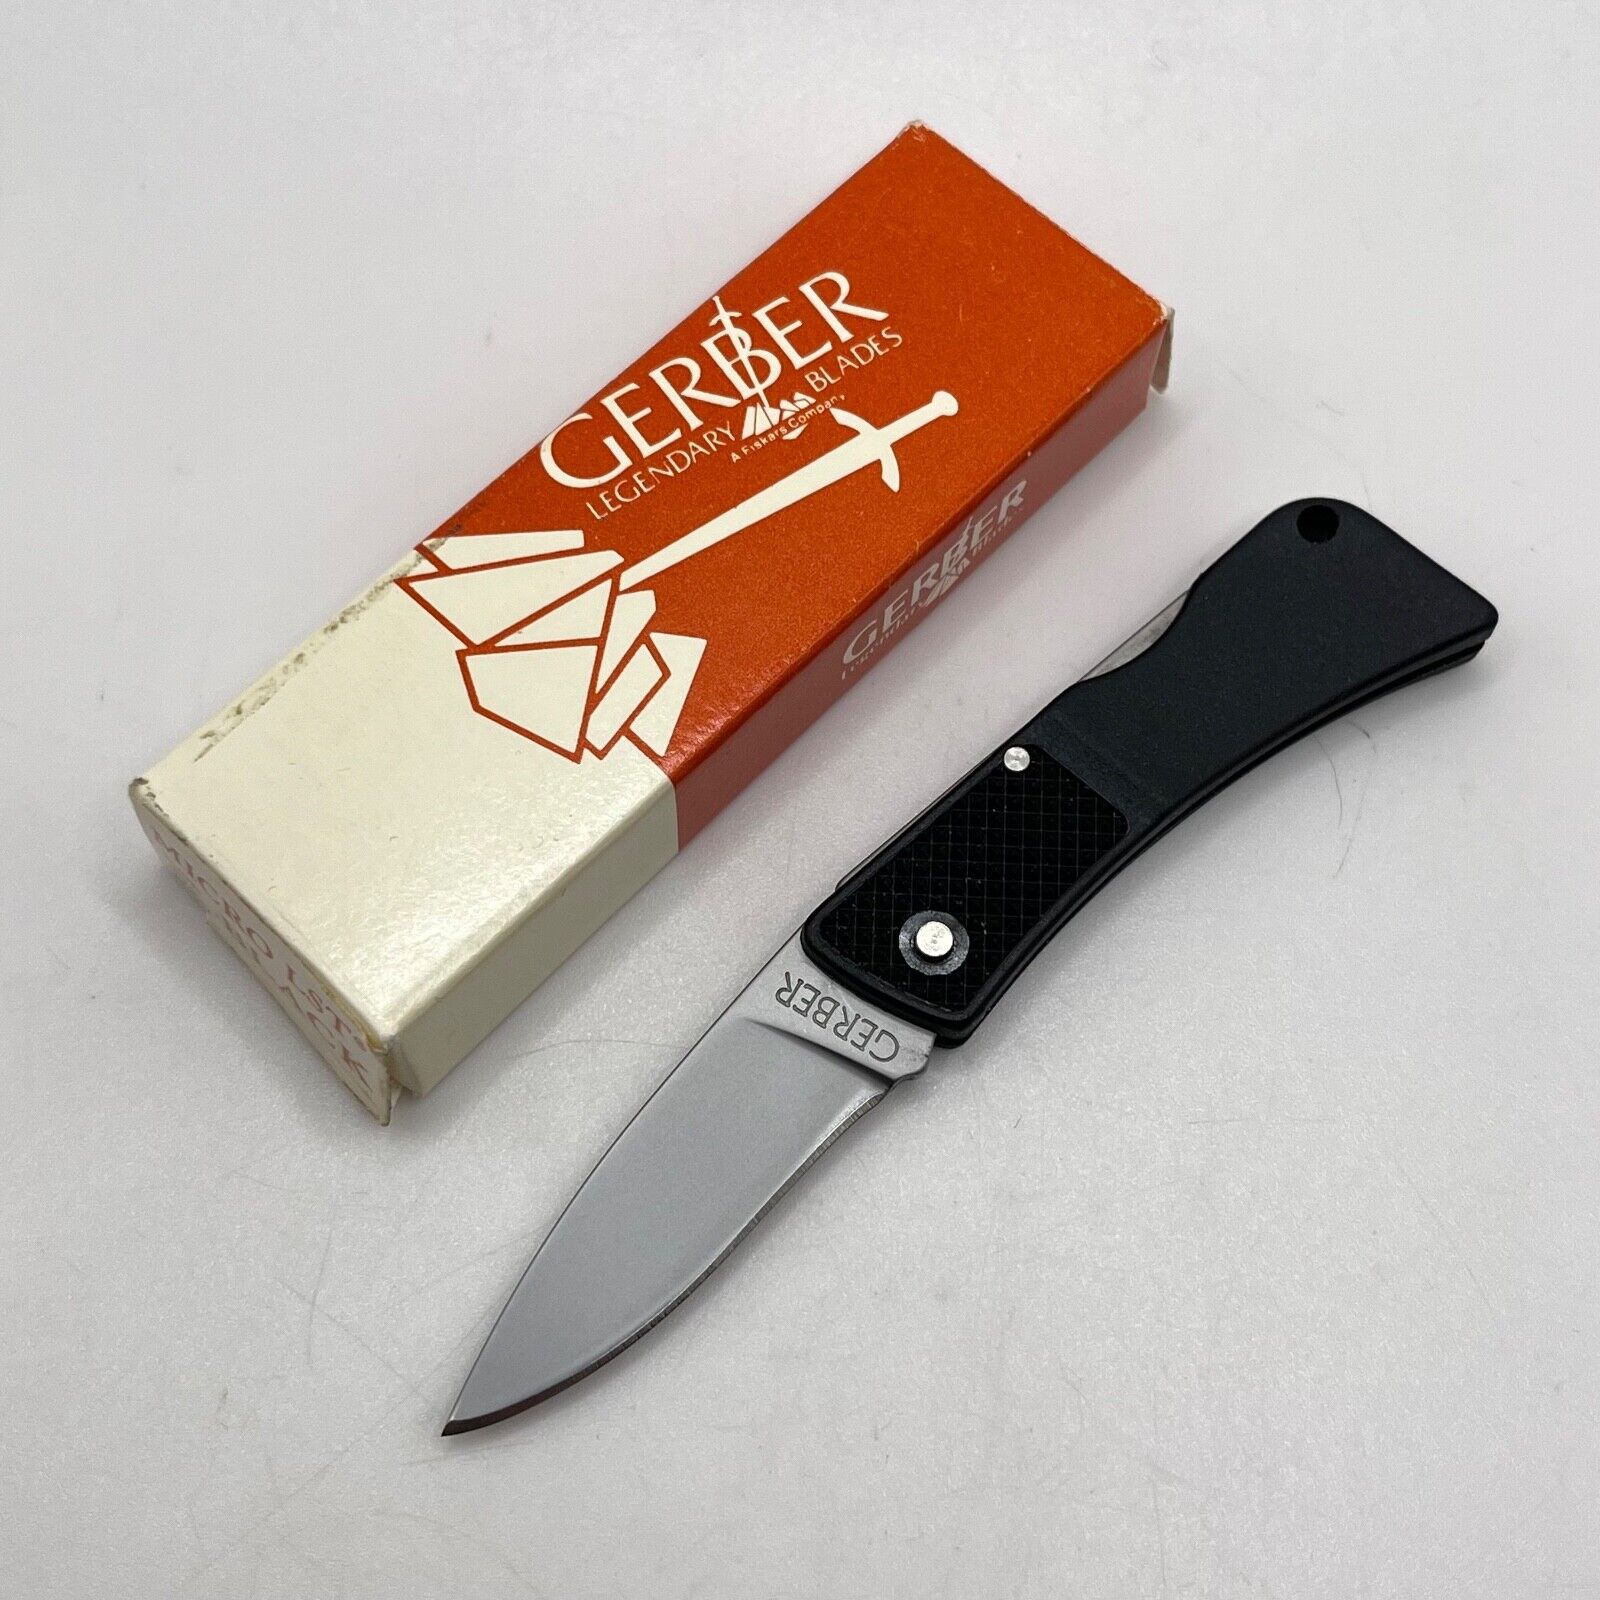 Gerber Micro LST 200 - Vintage Rare Discontinued Knife NOS - Brand new